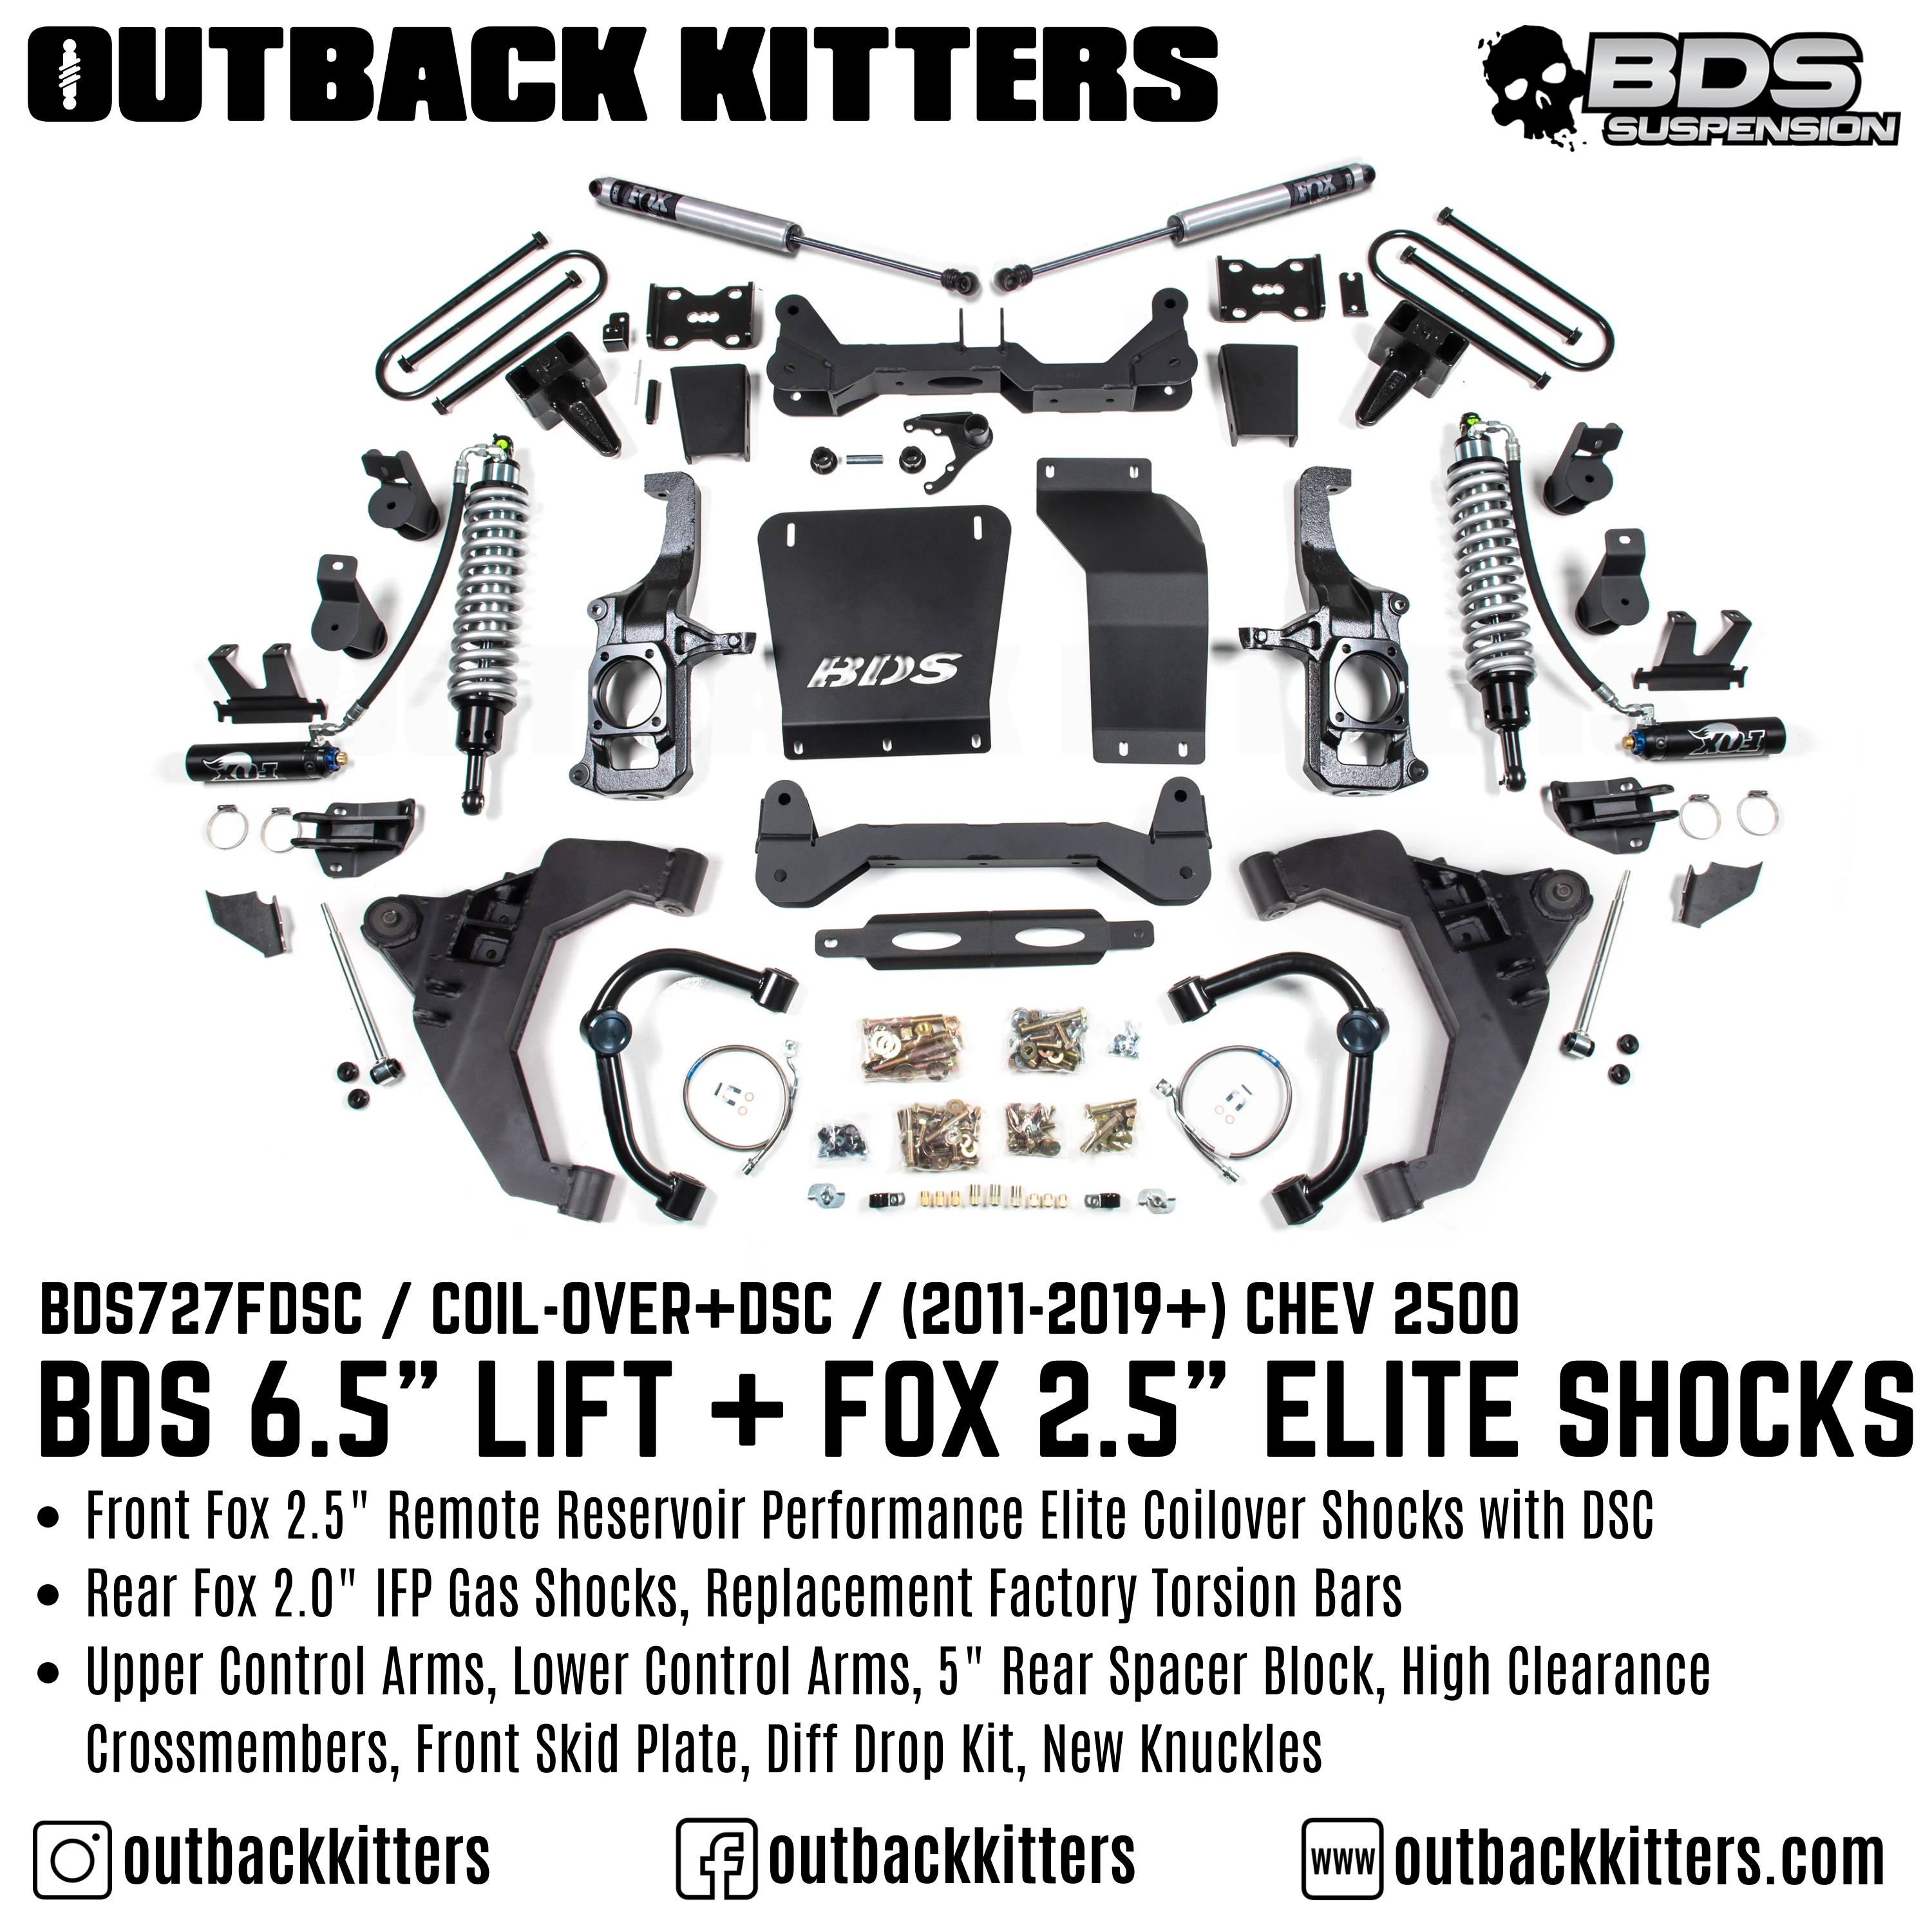 BDS Suspension 6.5" Lift Kit for 2011-2019 Chevy Silverado 2500 with Fox 2.5 Performance Elite Shocks - Outback Kitters